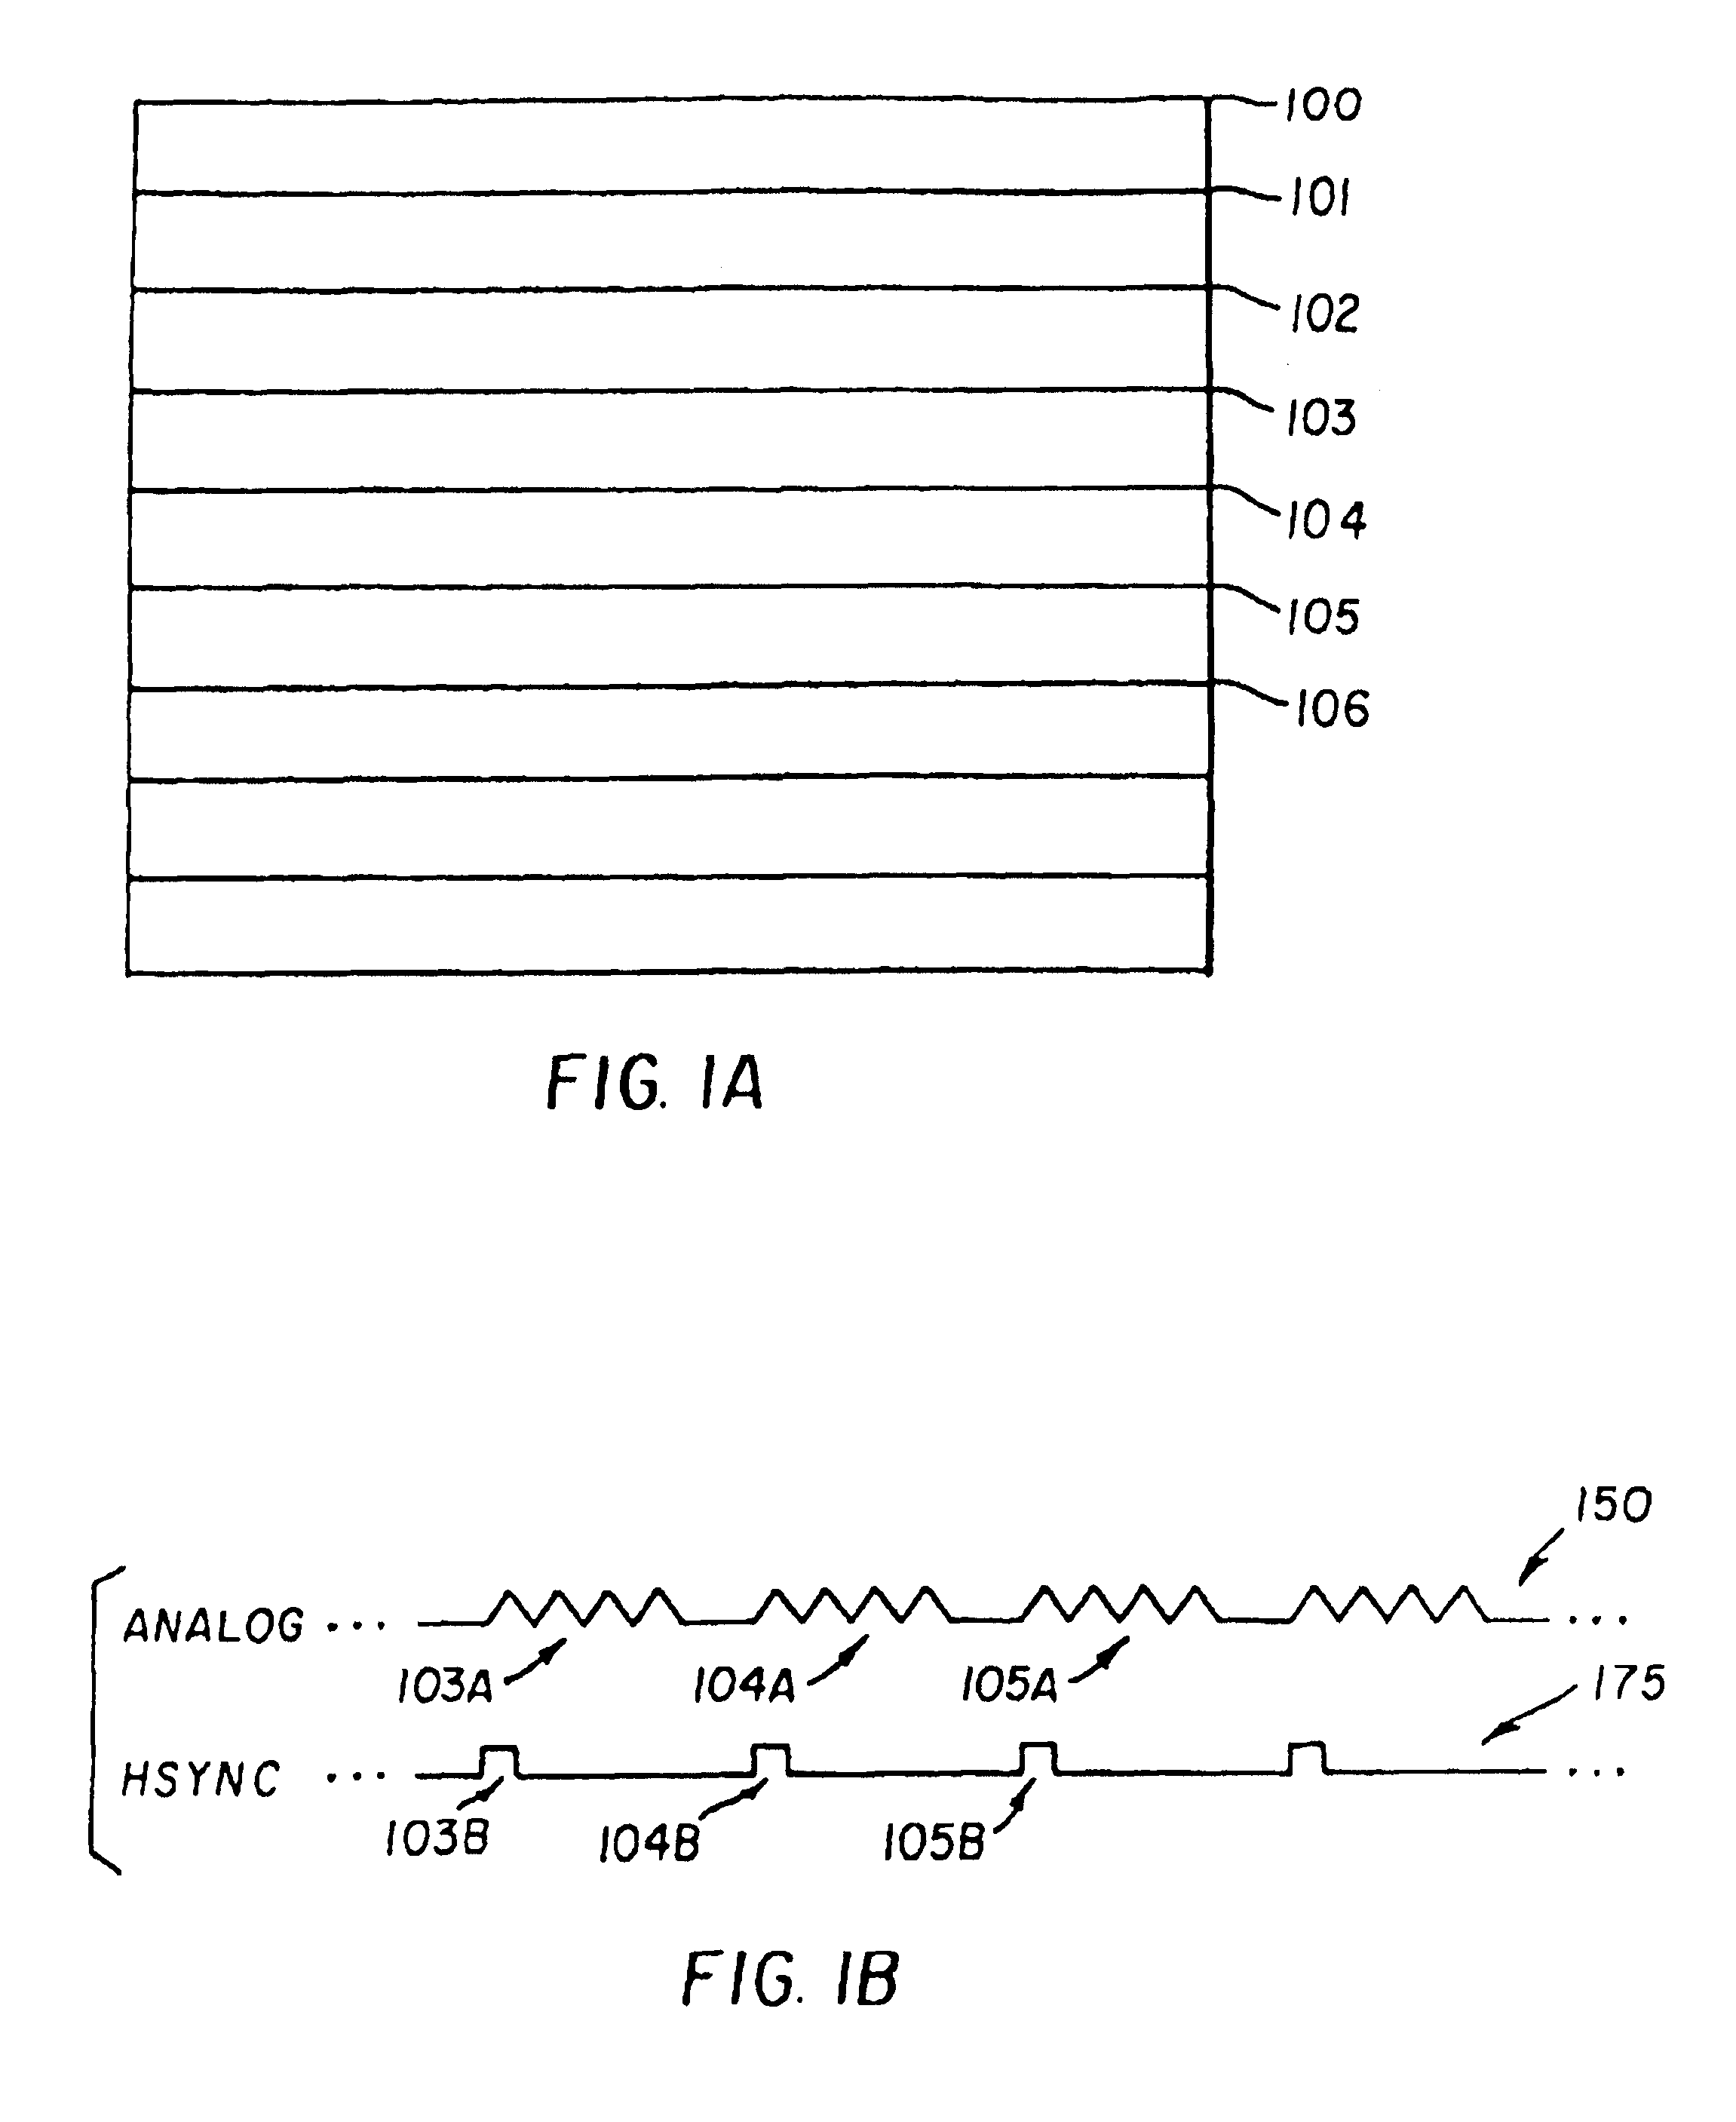 Method and system for displaying an analog image by a digital display device